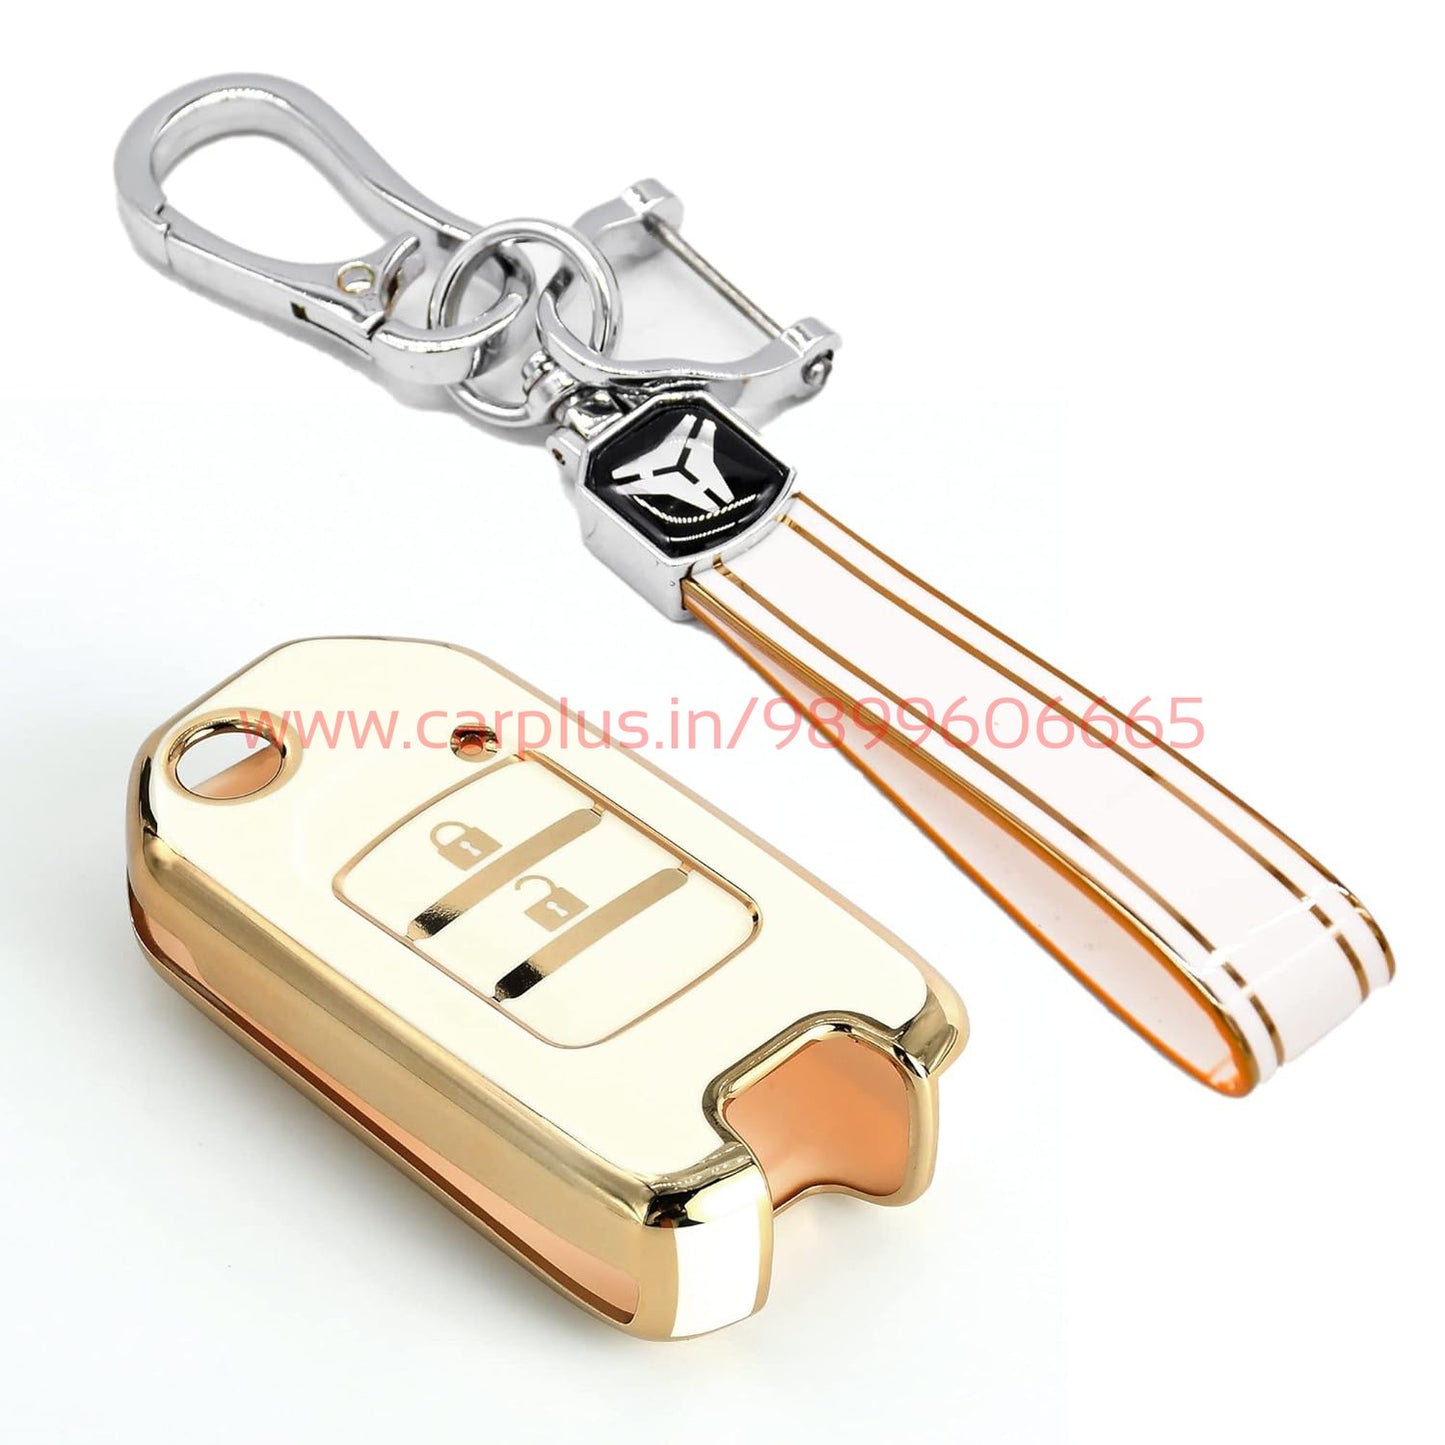 
                  
                    KMH-TPU Gold Key Cover Compatible for Honda City, WR-V, Jazz 2 Button Smart Key Cover-TPU GOLD KEY COVER-KMH-KEY COVER-White with Keychain-CARPLUS
                  
                